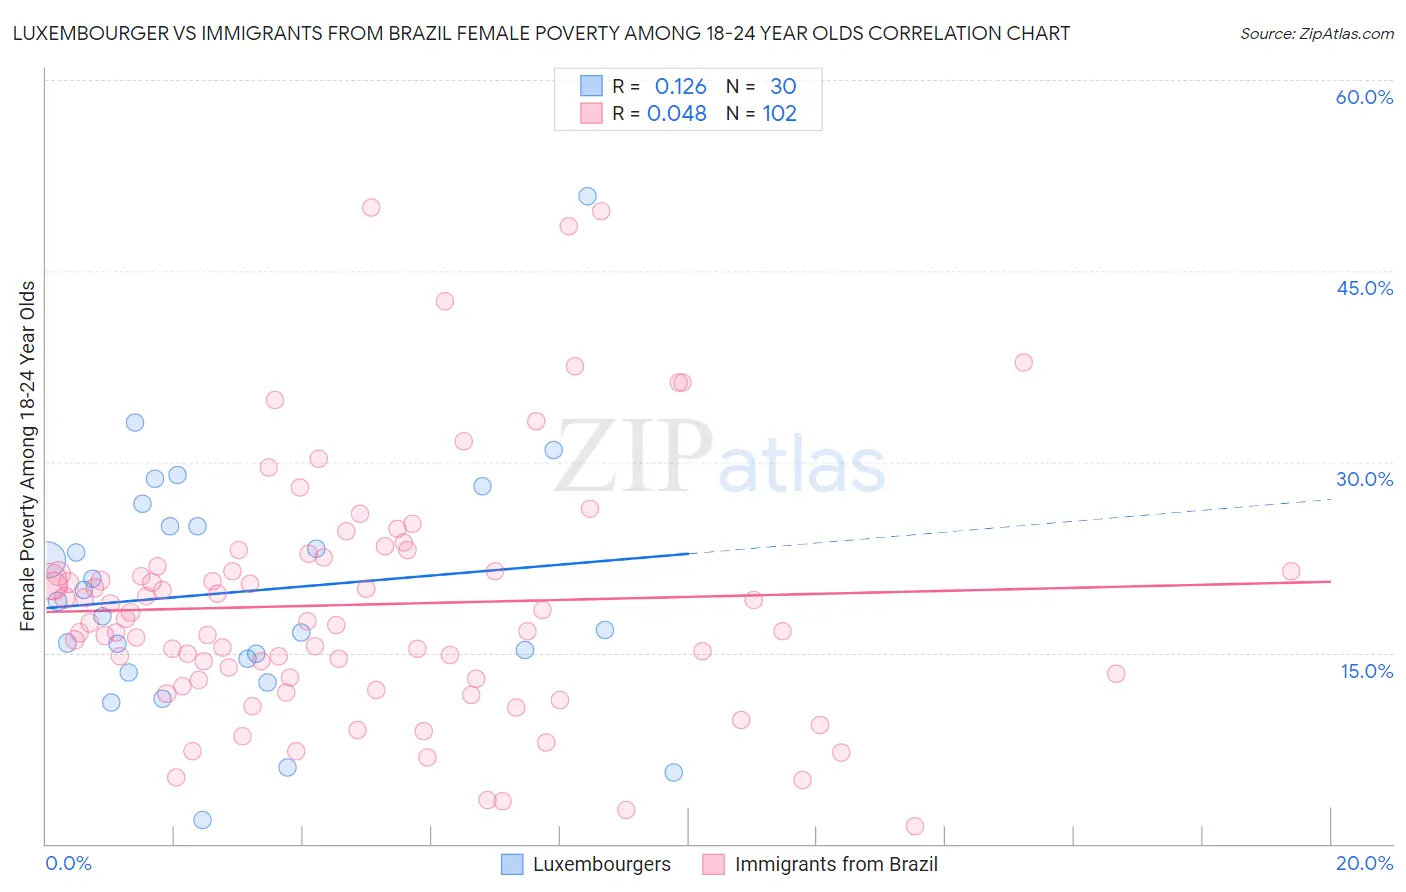 Luxembourger vs Immigrants from Brazil Female Poverty Among 18-24 Year Olds